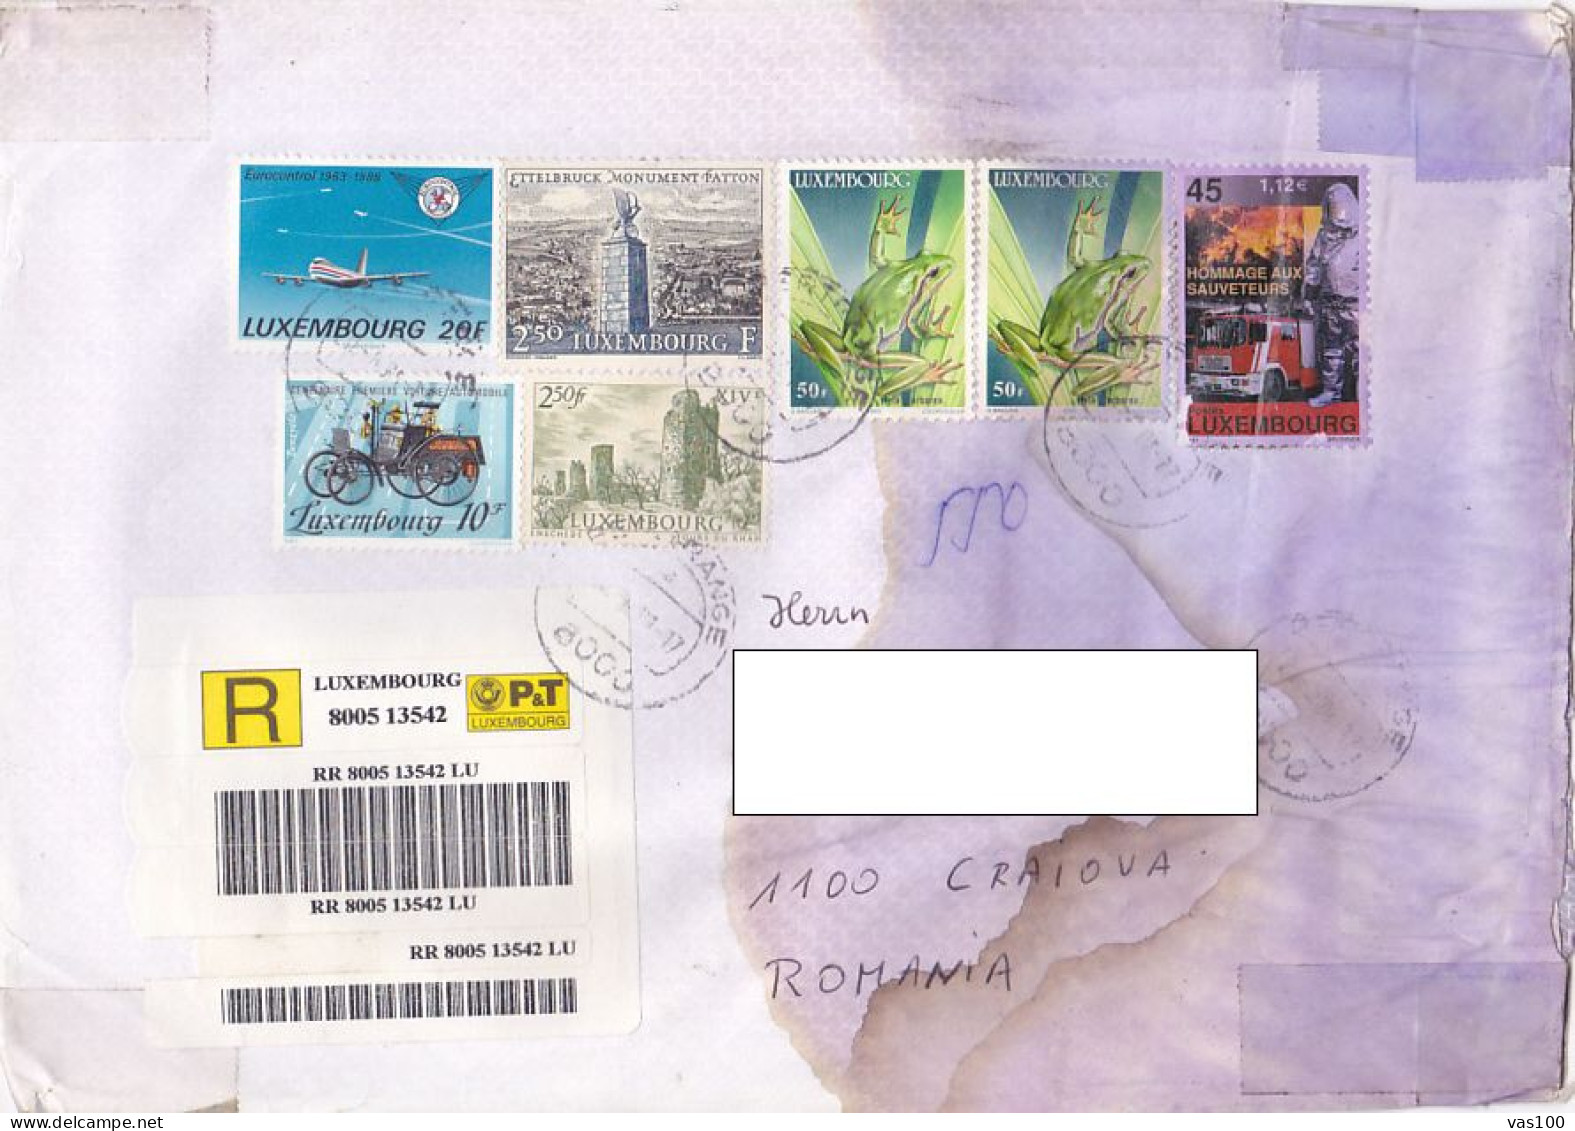 PLANE, FIRST CAR, MONUMENT, TOWER, FROG, FIREFIGHTERS, STAMPS ON REGISTERED COVER, 2001, LUXEMBOURG - Cartas & Documentos